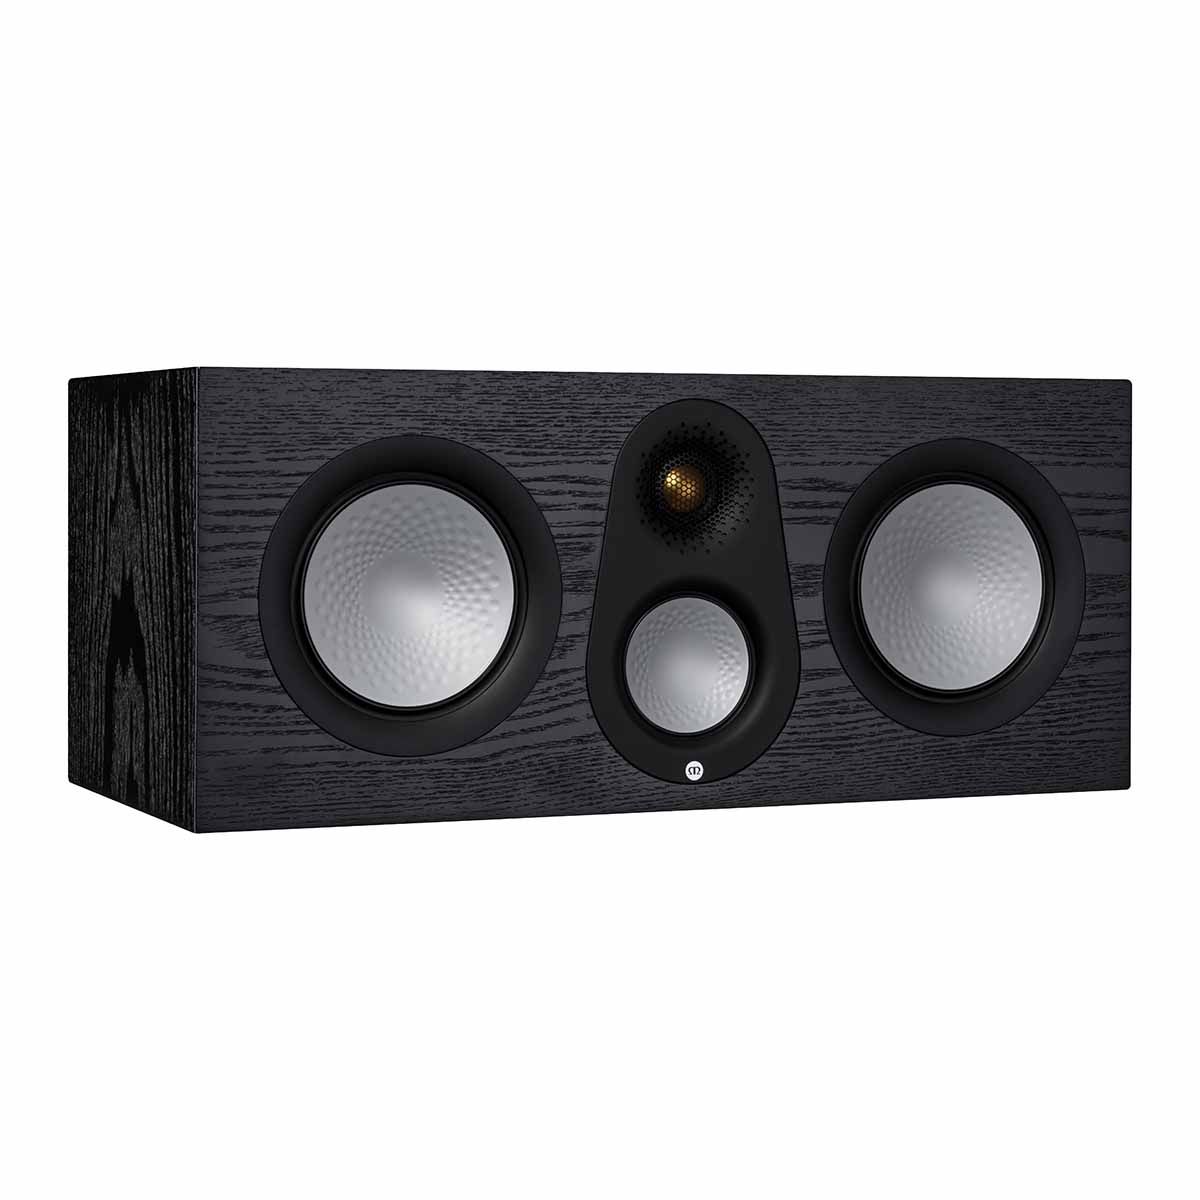 Monitor Audio Silver C250 Center Channel Speaker, Black Oak, front angle with grille off